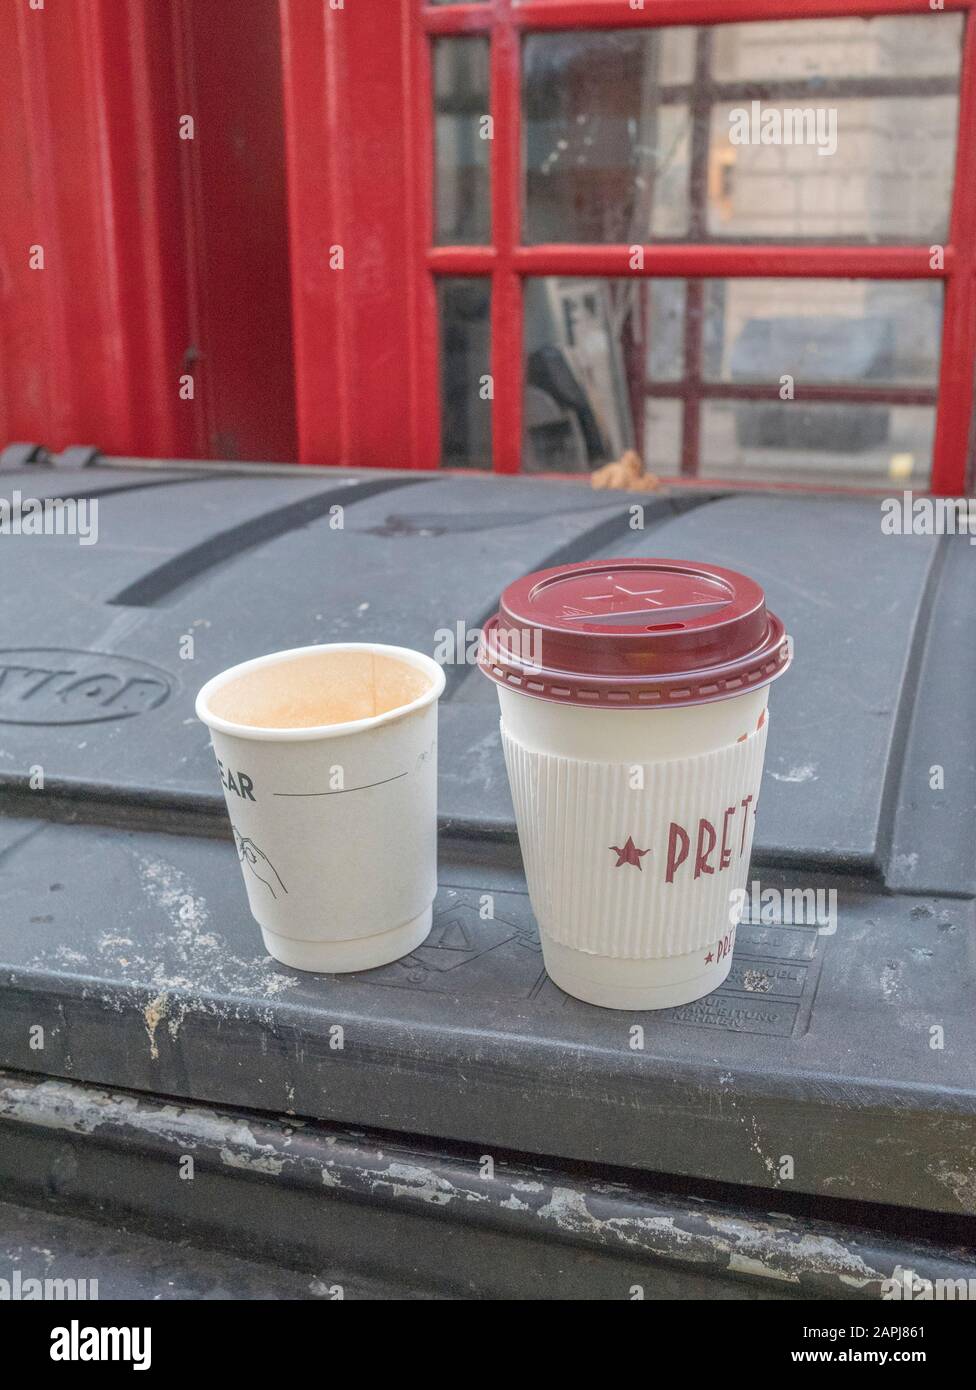 Pret a Manger plastic takeaway coffee cup plus another unknown brand discarded on top of dumpster near London's Oxford Street. Plastic packaging. Stock Photo